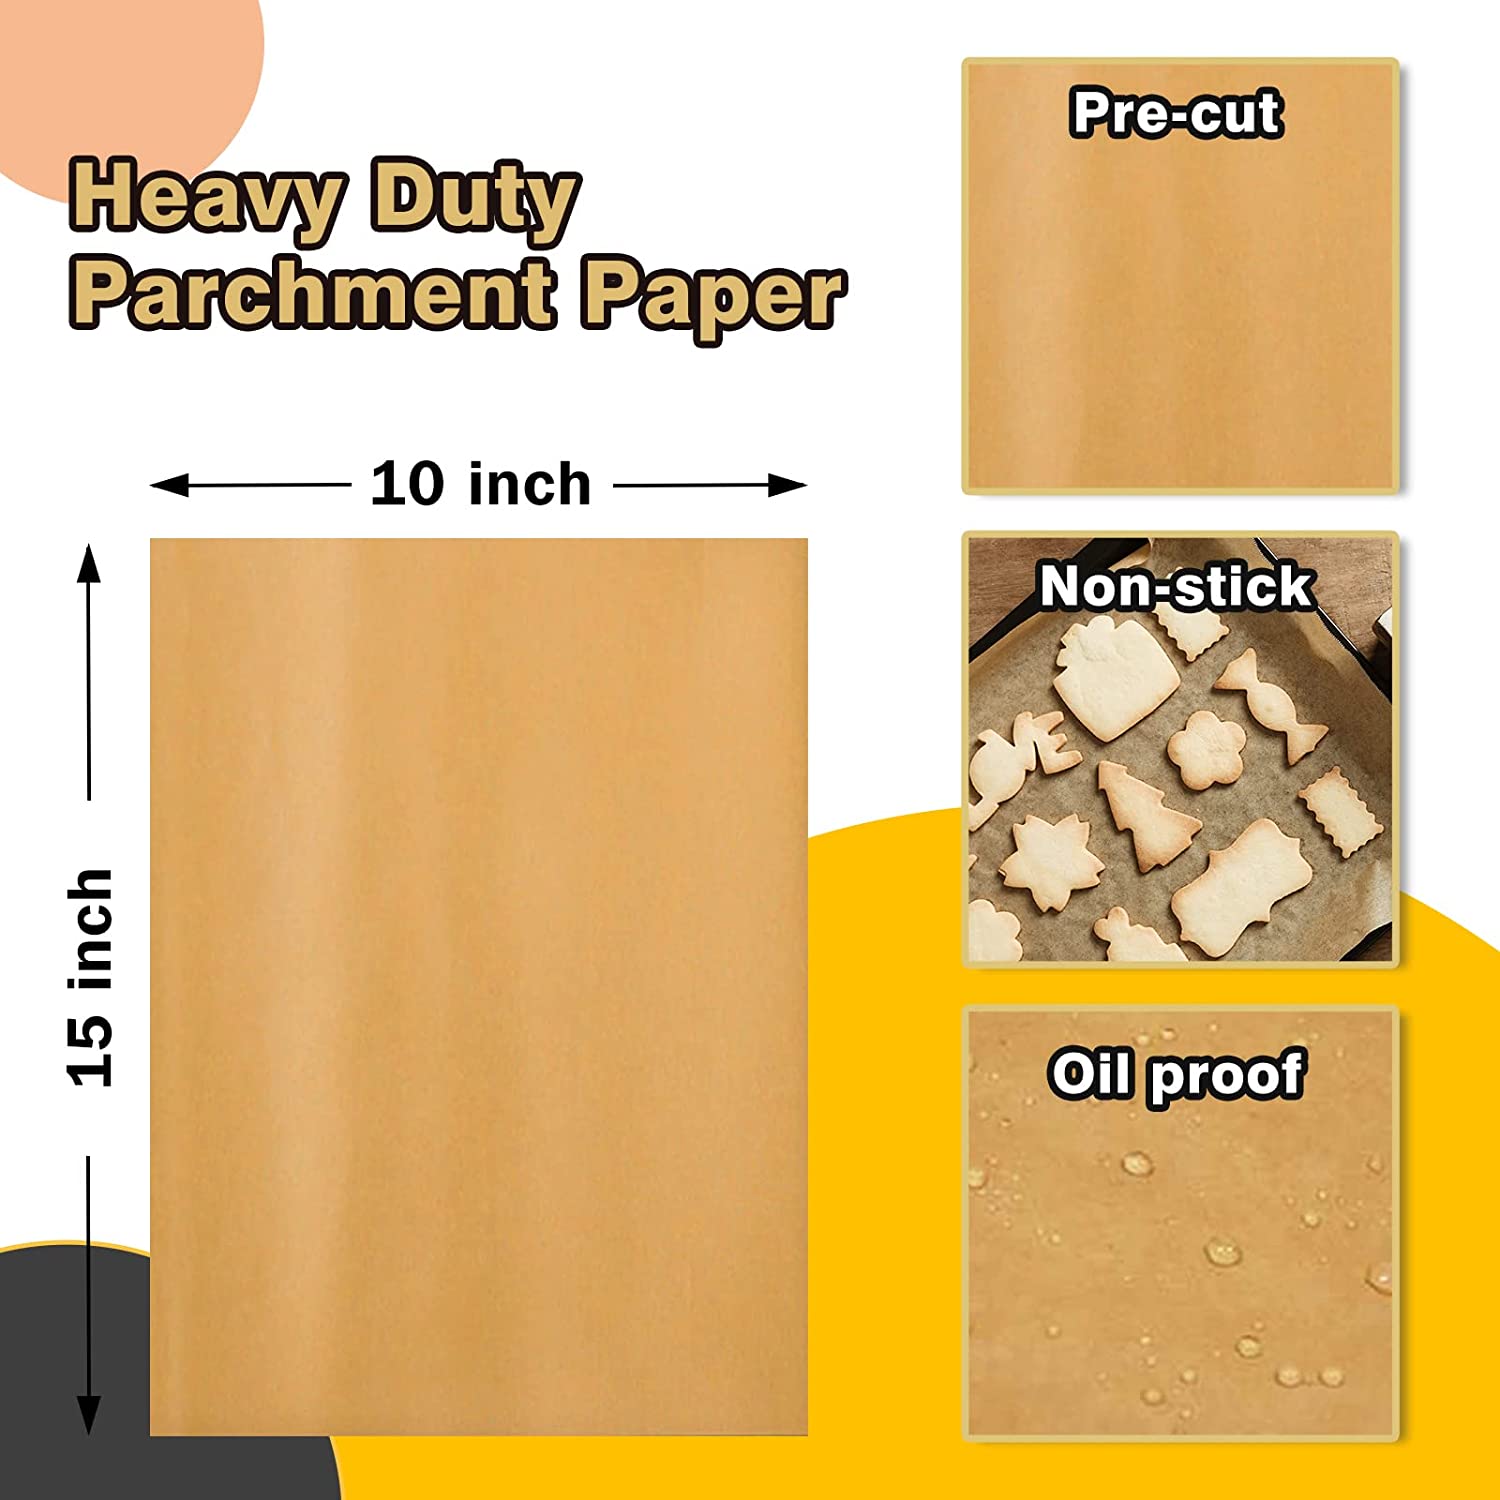 Katbite Unbleached Parchment Paper for Baking, 15 in x 210 ft, 260 Sq.Ft,  Heavy Duty Baking Paper with Slide Cutter, Non-stick Brown Parchment Paper